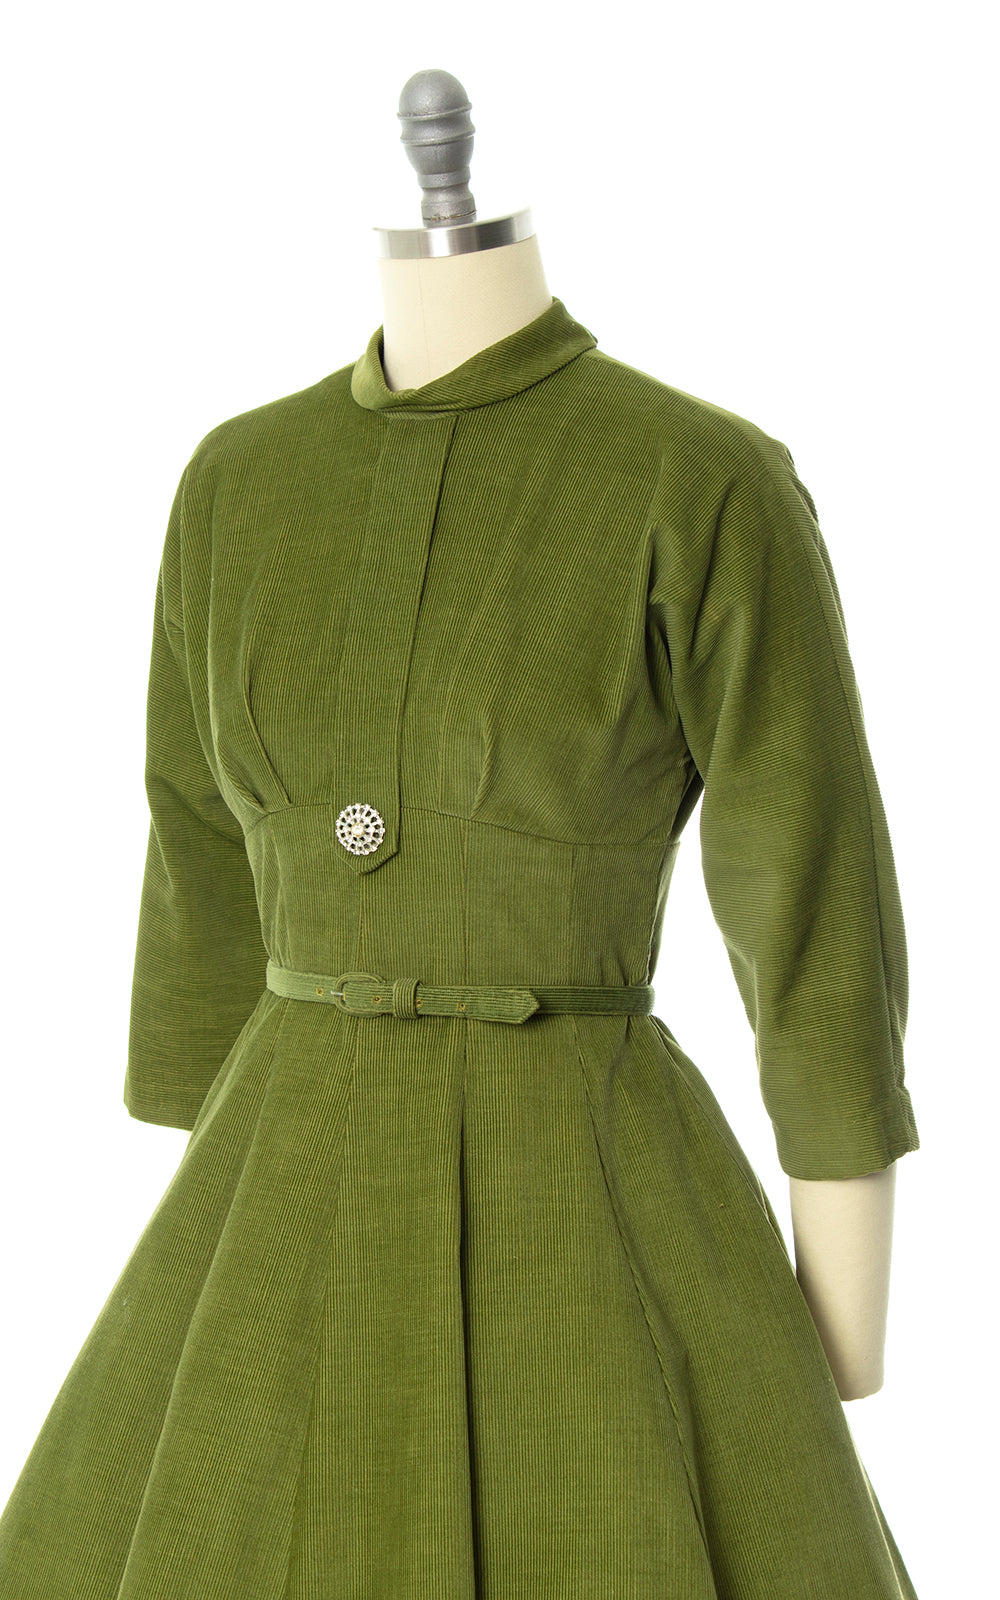 Vintage 1950s 50s Olive Green Corduroy Fit and Flare Dress Birthday Life Vintage